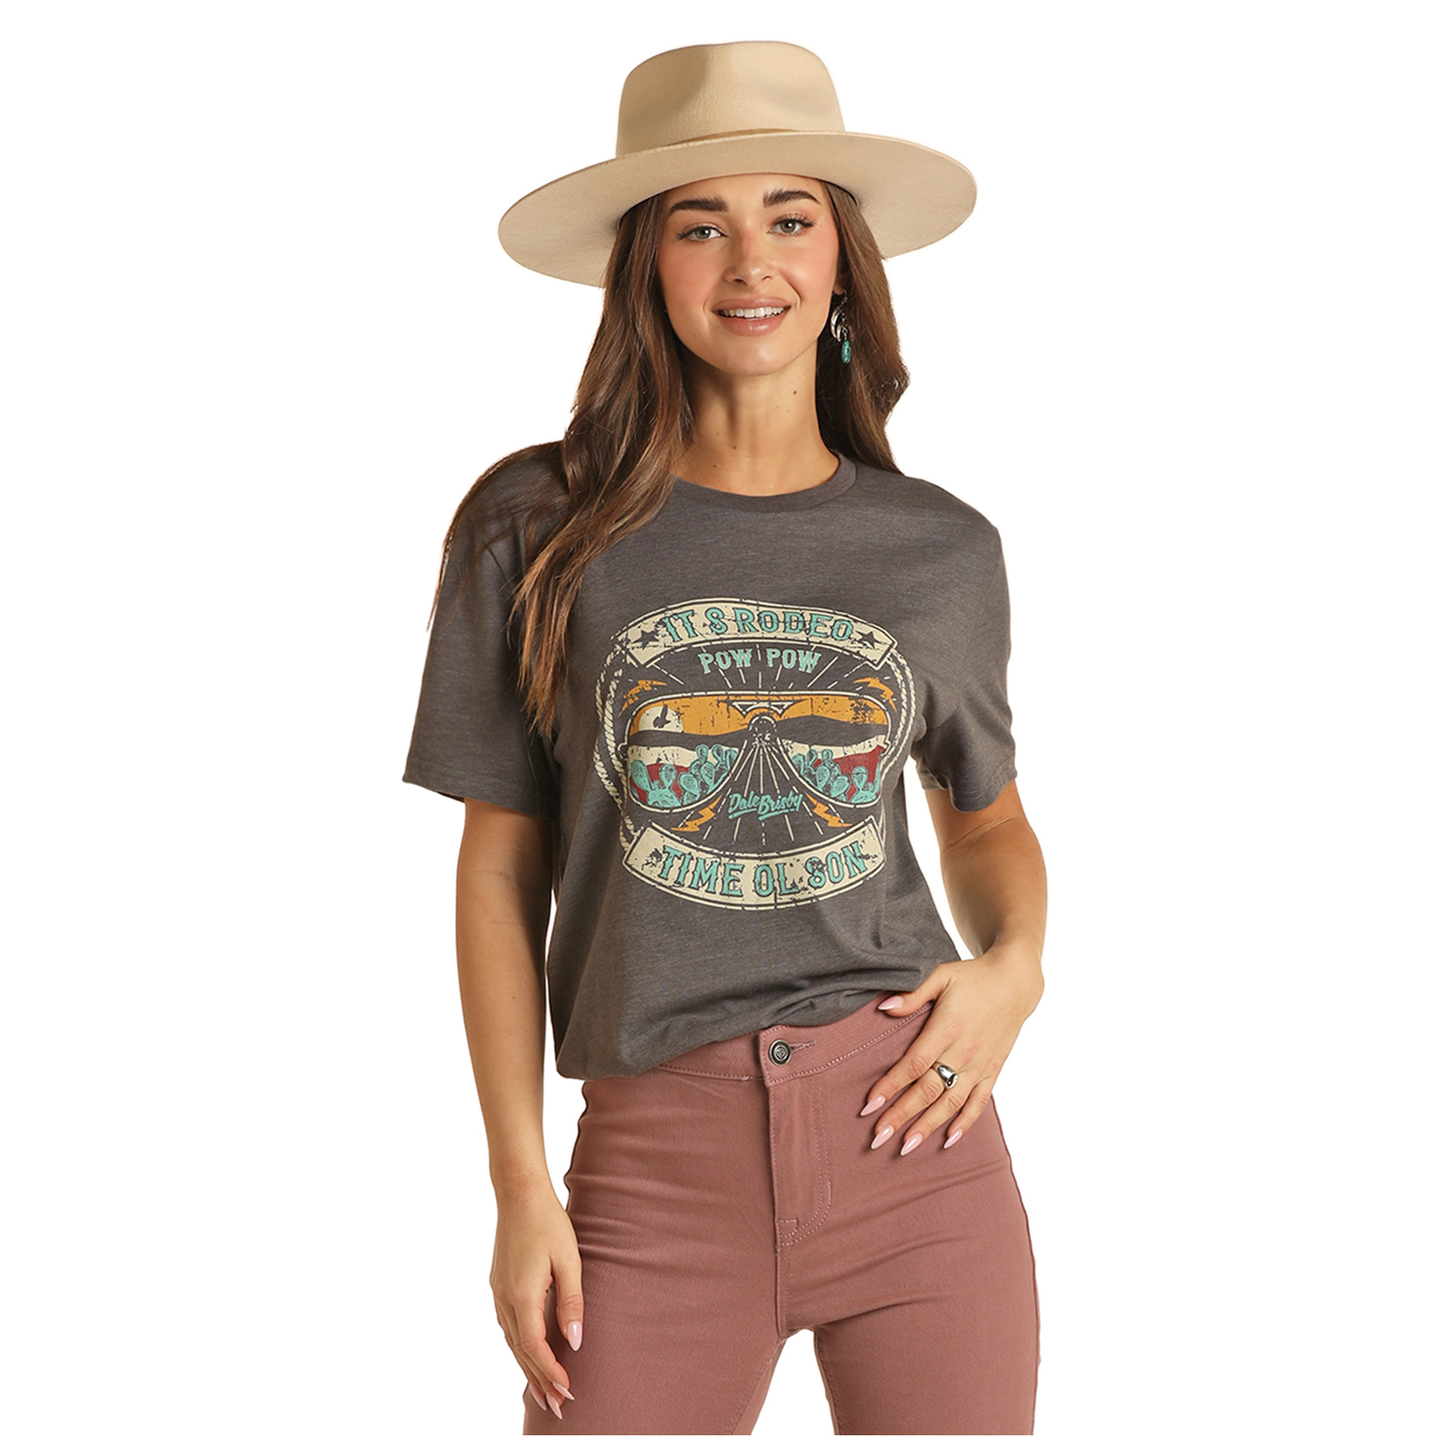 Panhandle® Unisex "IT'S RODEO TIME" Dale Brisby Grey Tee RRUT21R06B-02